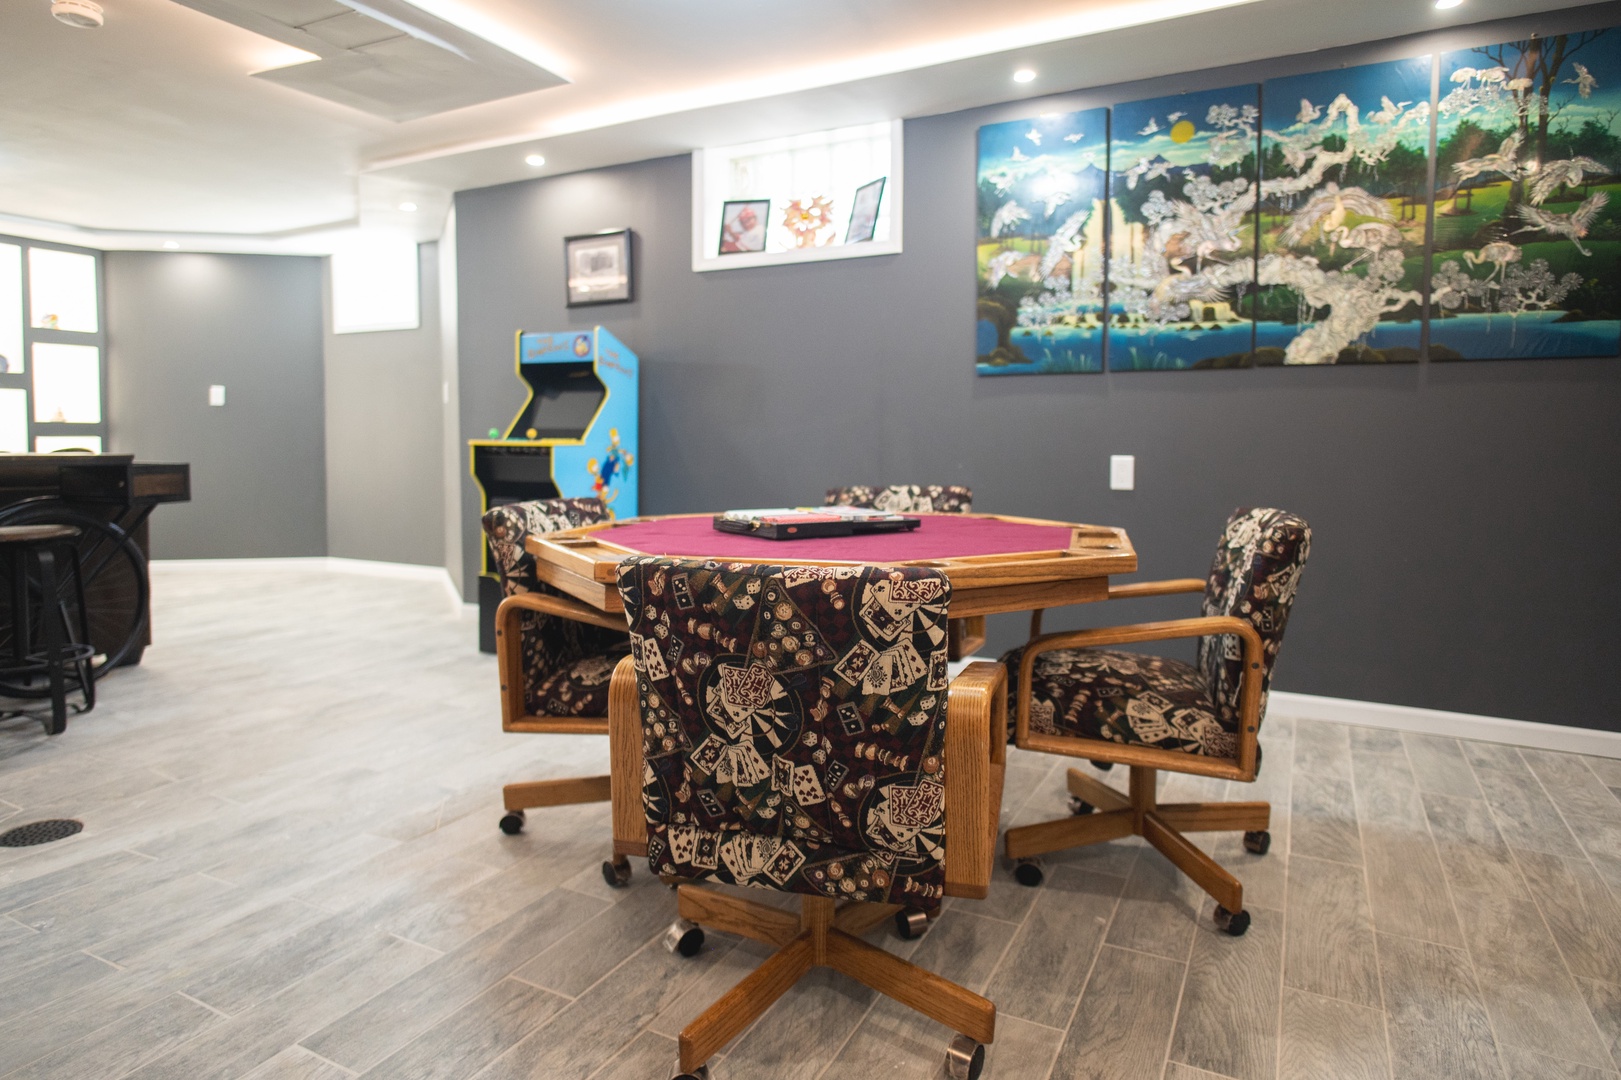 Feeling competitive? The main house game room is the perfect hangout spot